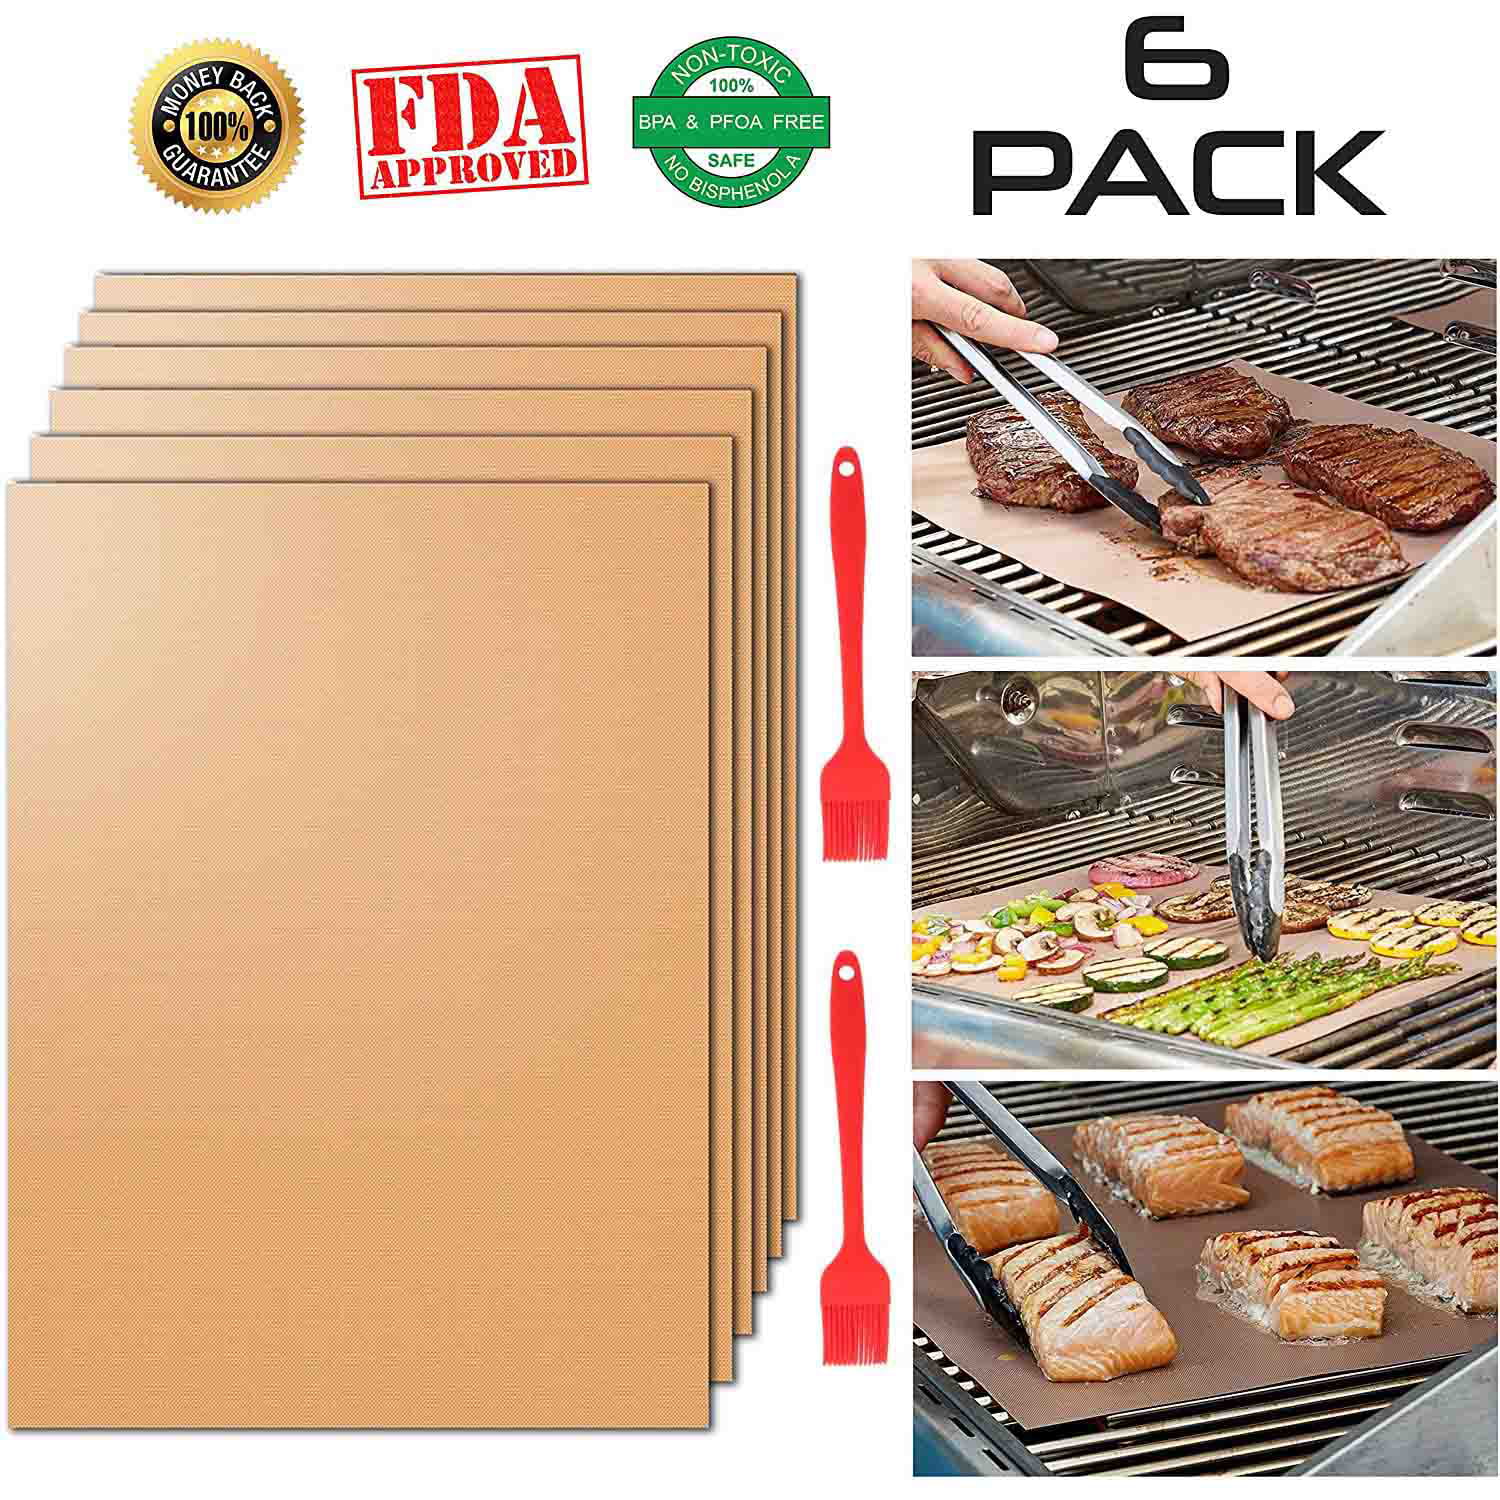 4 PCS Copper Chef Grill and Bake Mats BBQ Pad Tool Camping Hiking Home Outdoor 